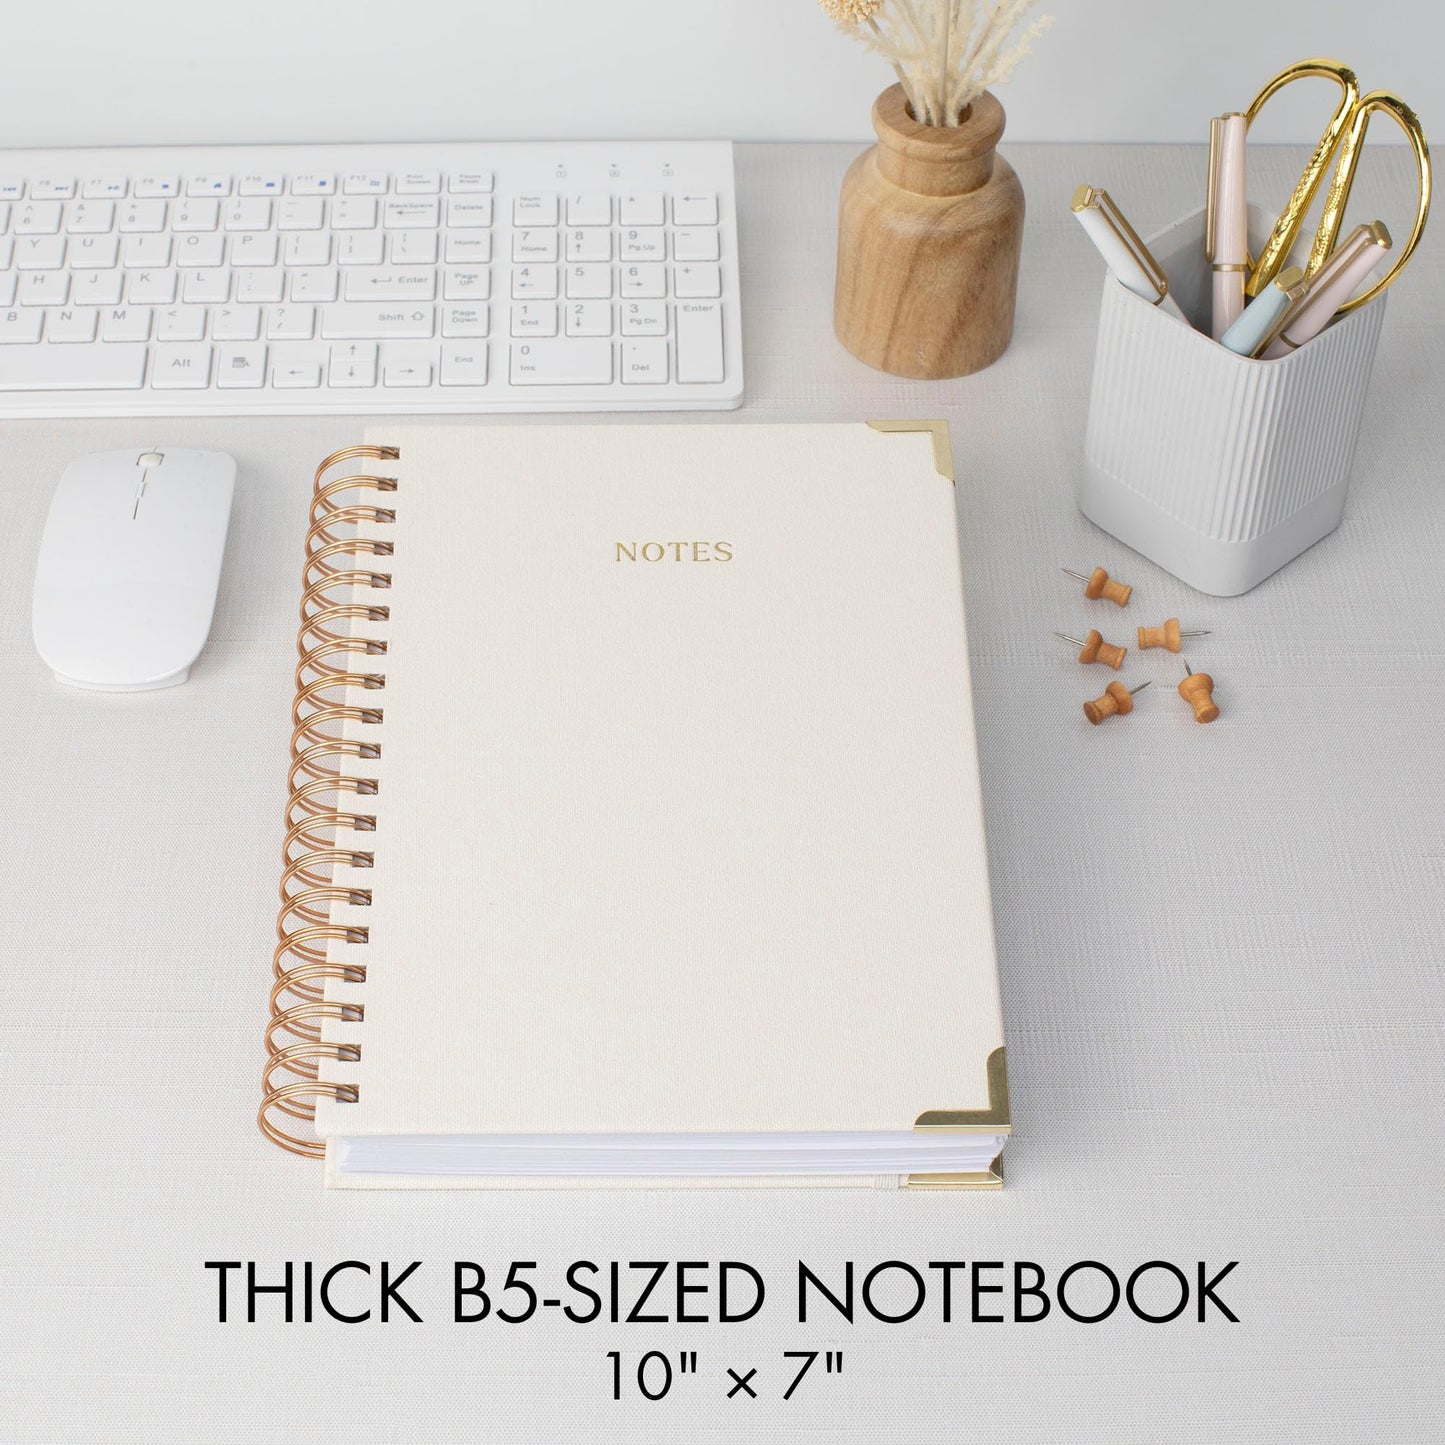 Aesthetic Thick Spiral Notebook Journal For Women in B5 Format - Modern Linen Hardcover College Ruled Note Book With 300 Lined Pages - Perfect For Writing And Staying Organized at Work or School